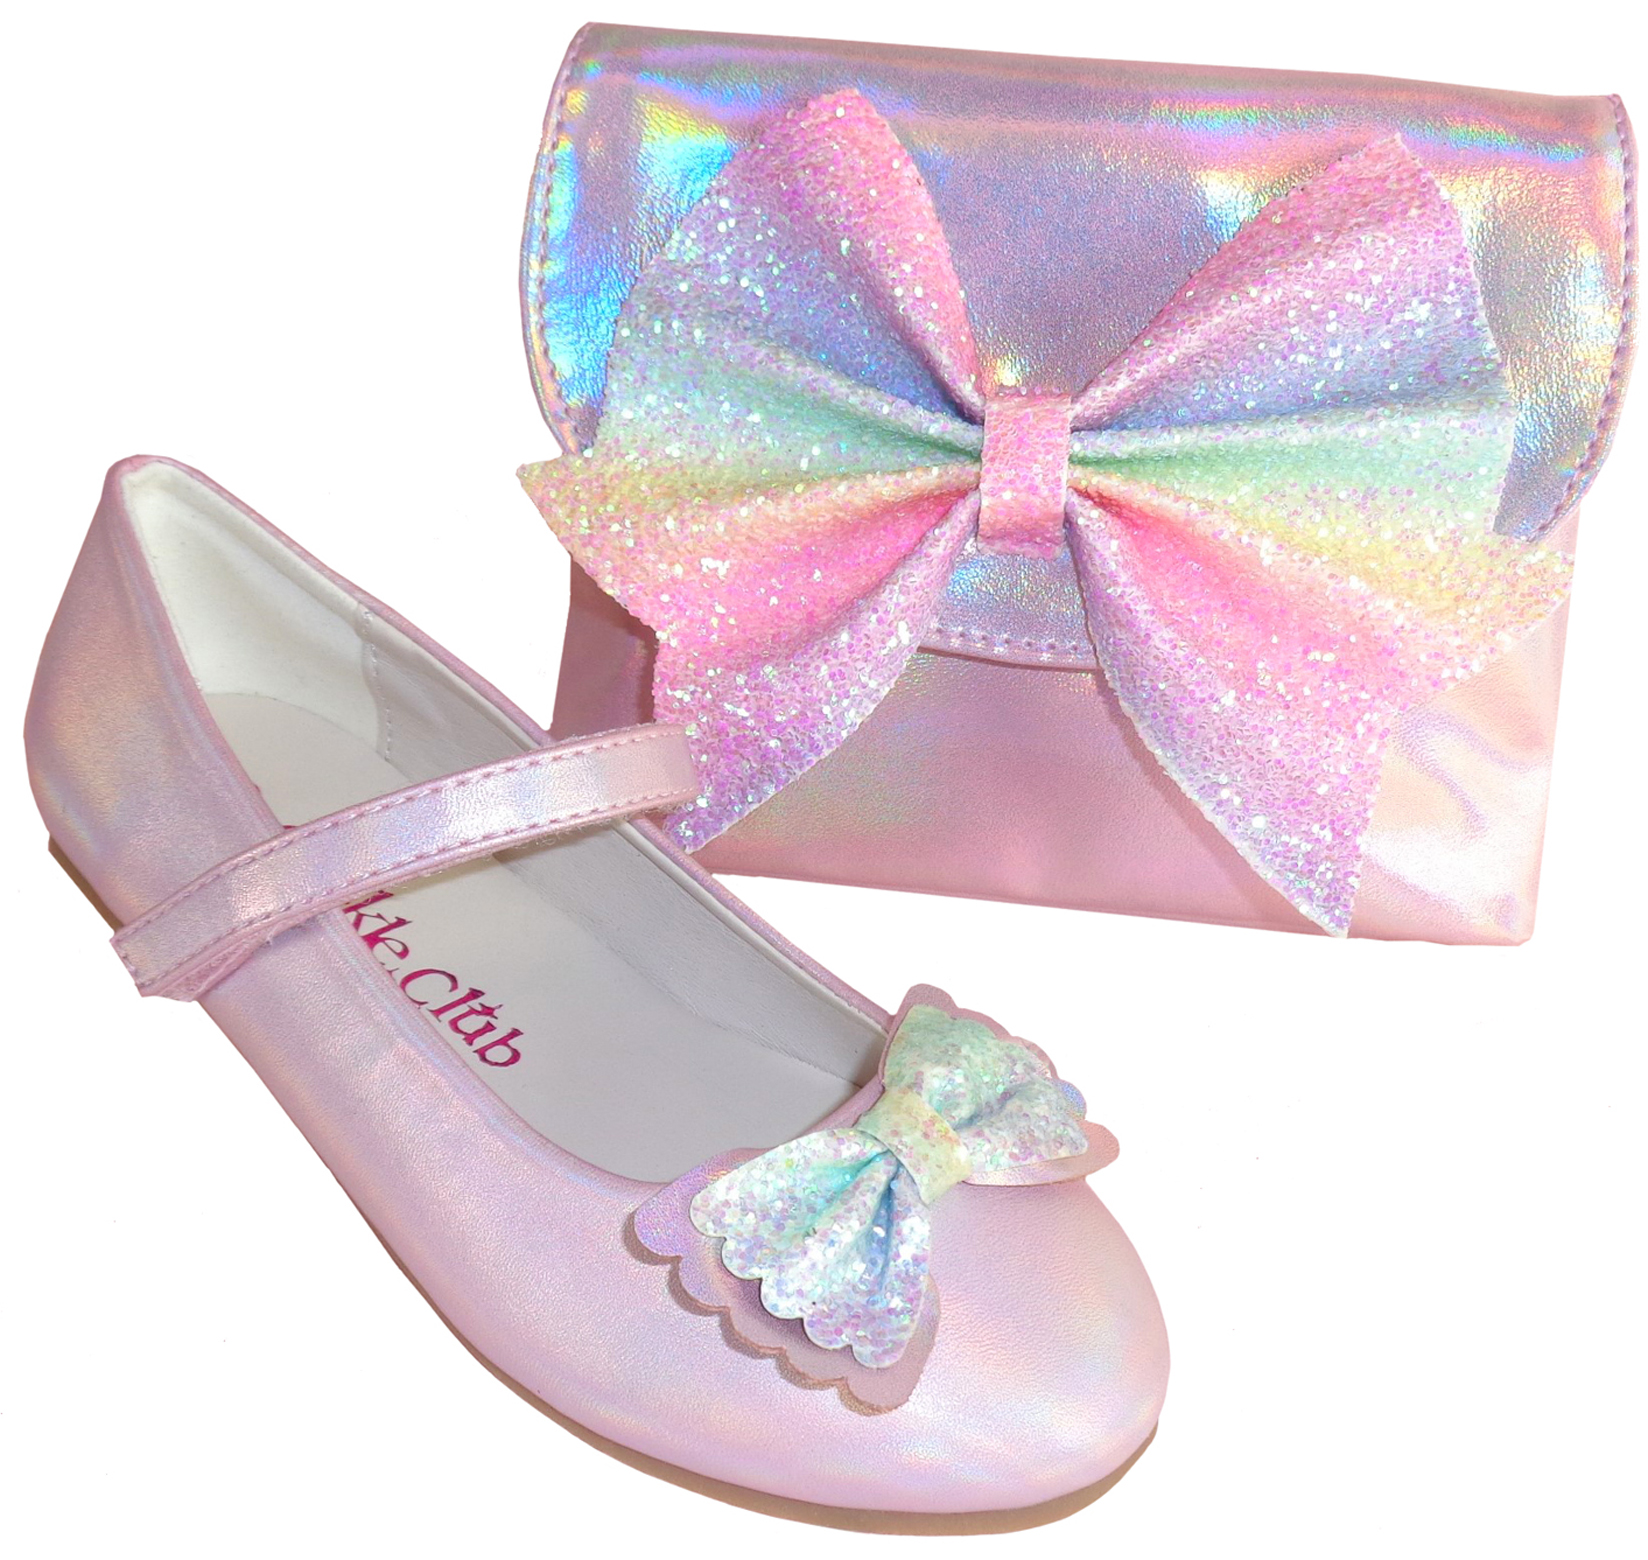 Pale pink sparkly ballerina party shoes and matching bag -0